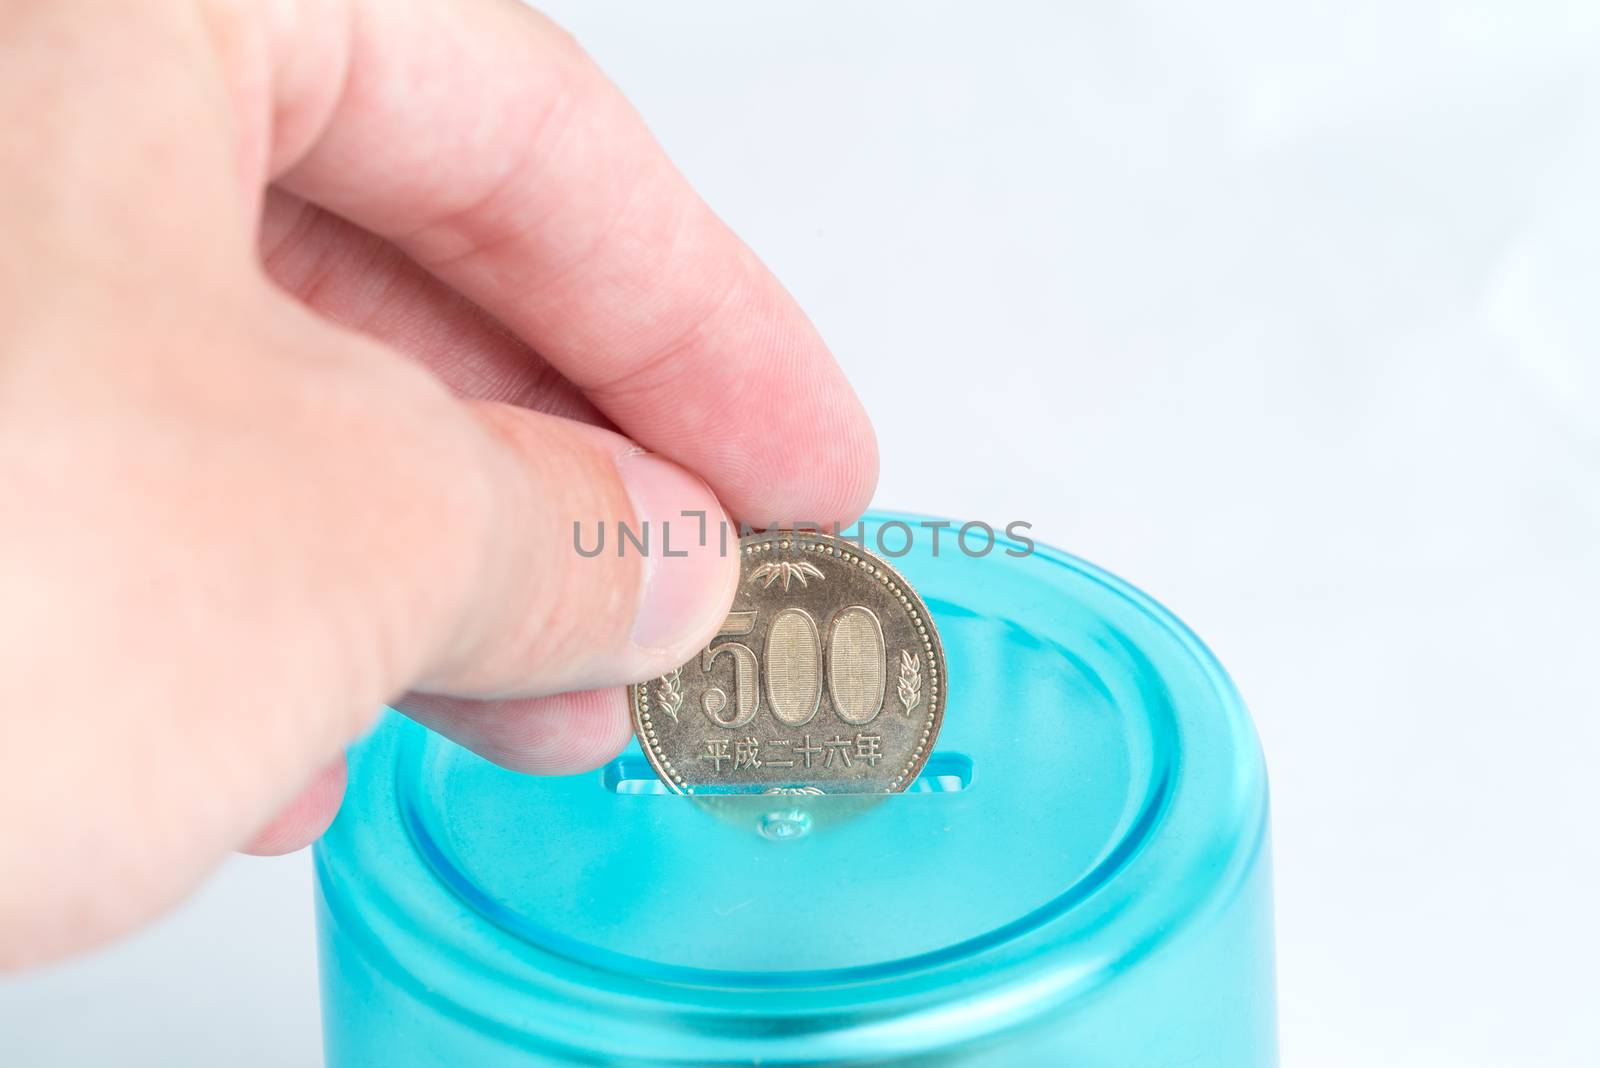 A man's hand putting a 500 Japanese Yen coin into a blue bank with a white background.